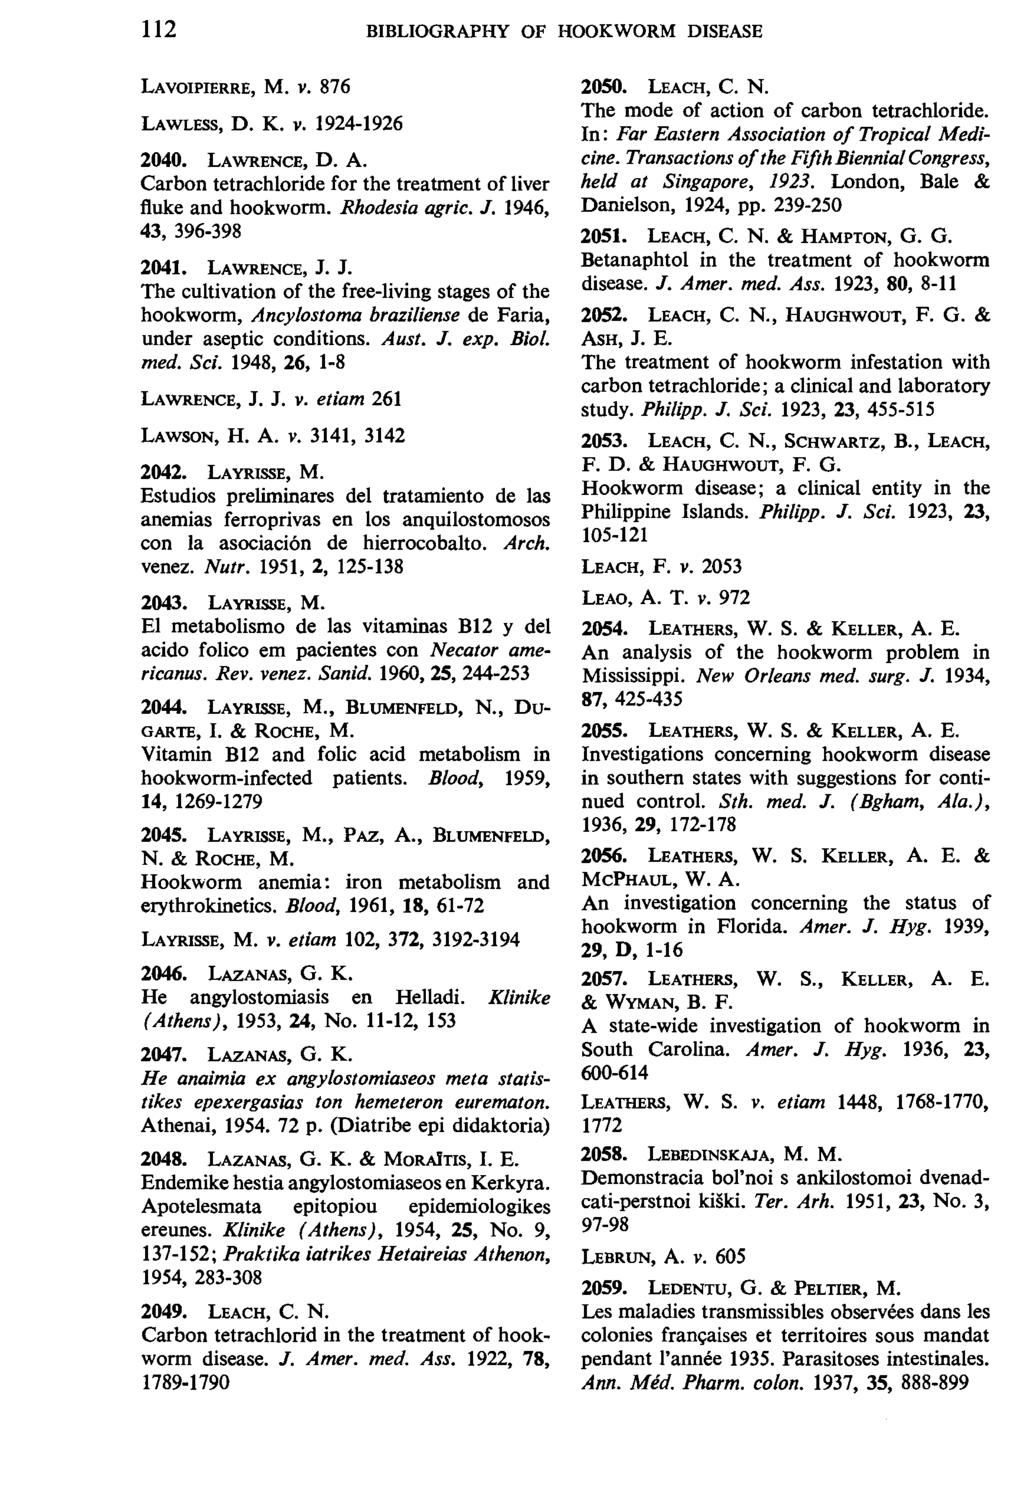 112 BIBLIOGRAPHY OF HOOKWORM DISEASE LAVOIPIERRE, M. V. 876 LAWLESS, D. K. v. 1924-1926 2040. LAWRENCE, D. A. Carbon tetrachloride for the treatment of liver fluke and hookworm. Rhodesia agric. J.